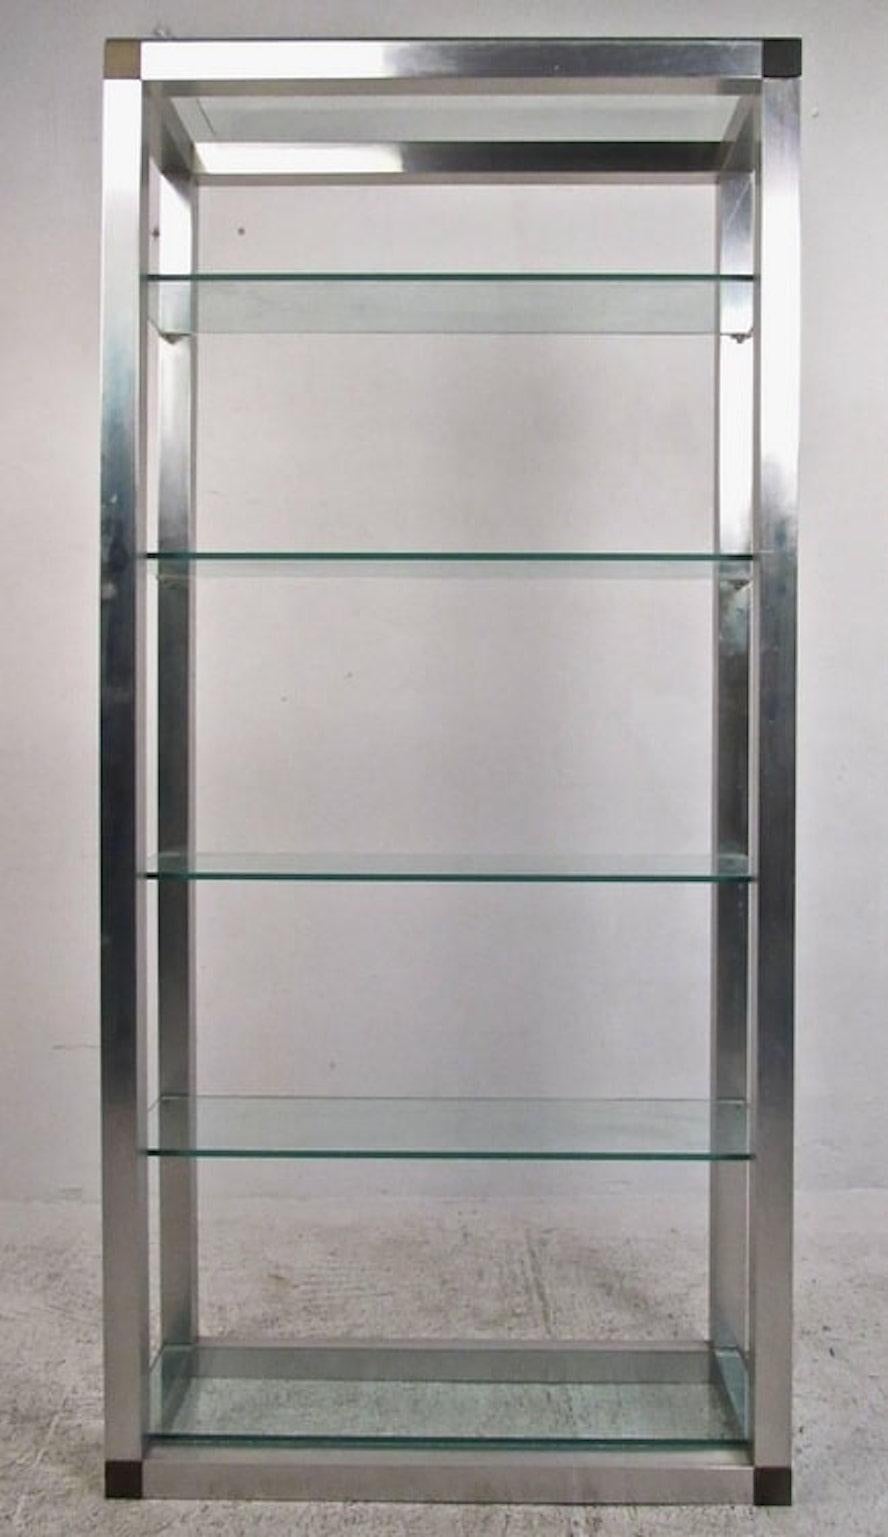 This vintage display unit makes an ideal storage shelving system for a variety of interiors. Aluminum finish with corner trim is outfitted with thick glass shelves. 
Please confirm item location (NY or NJ).